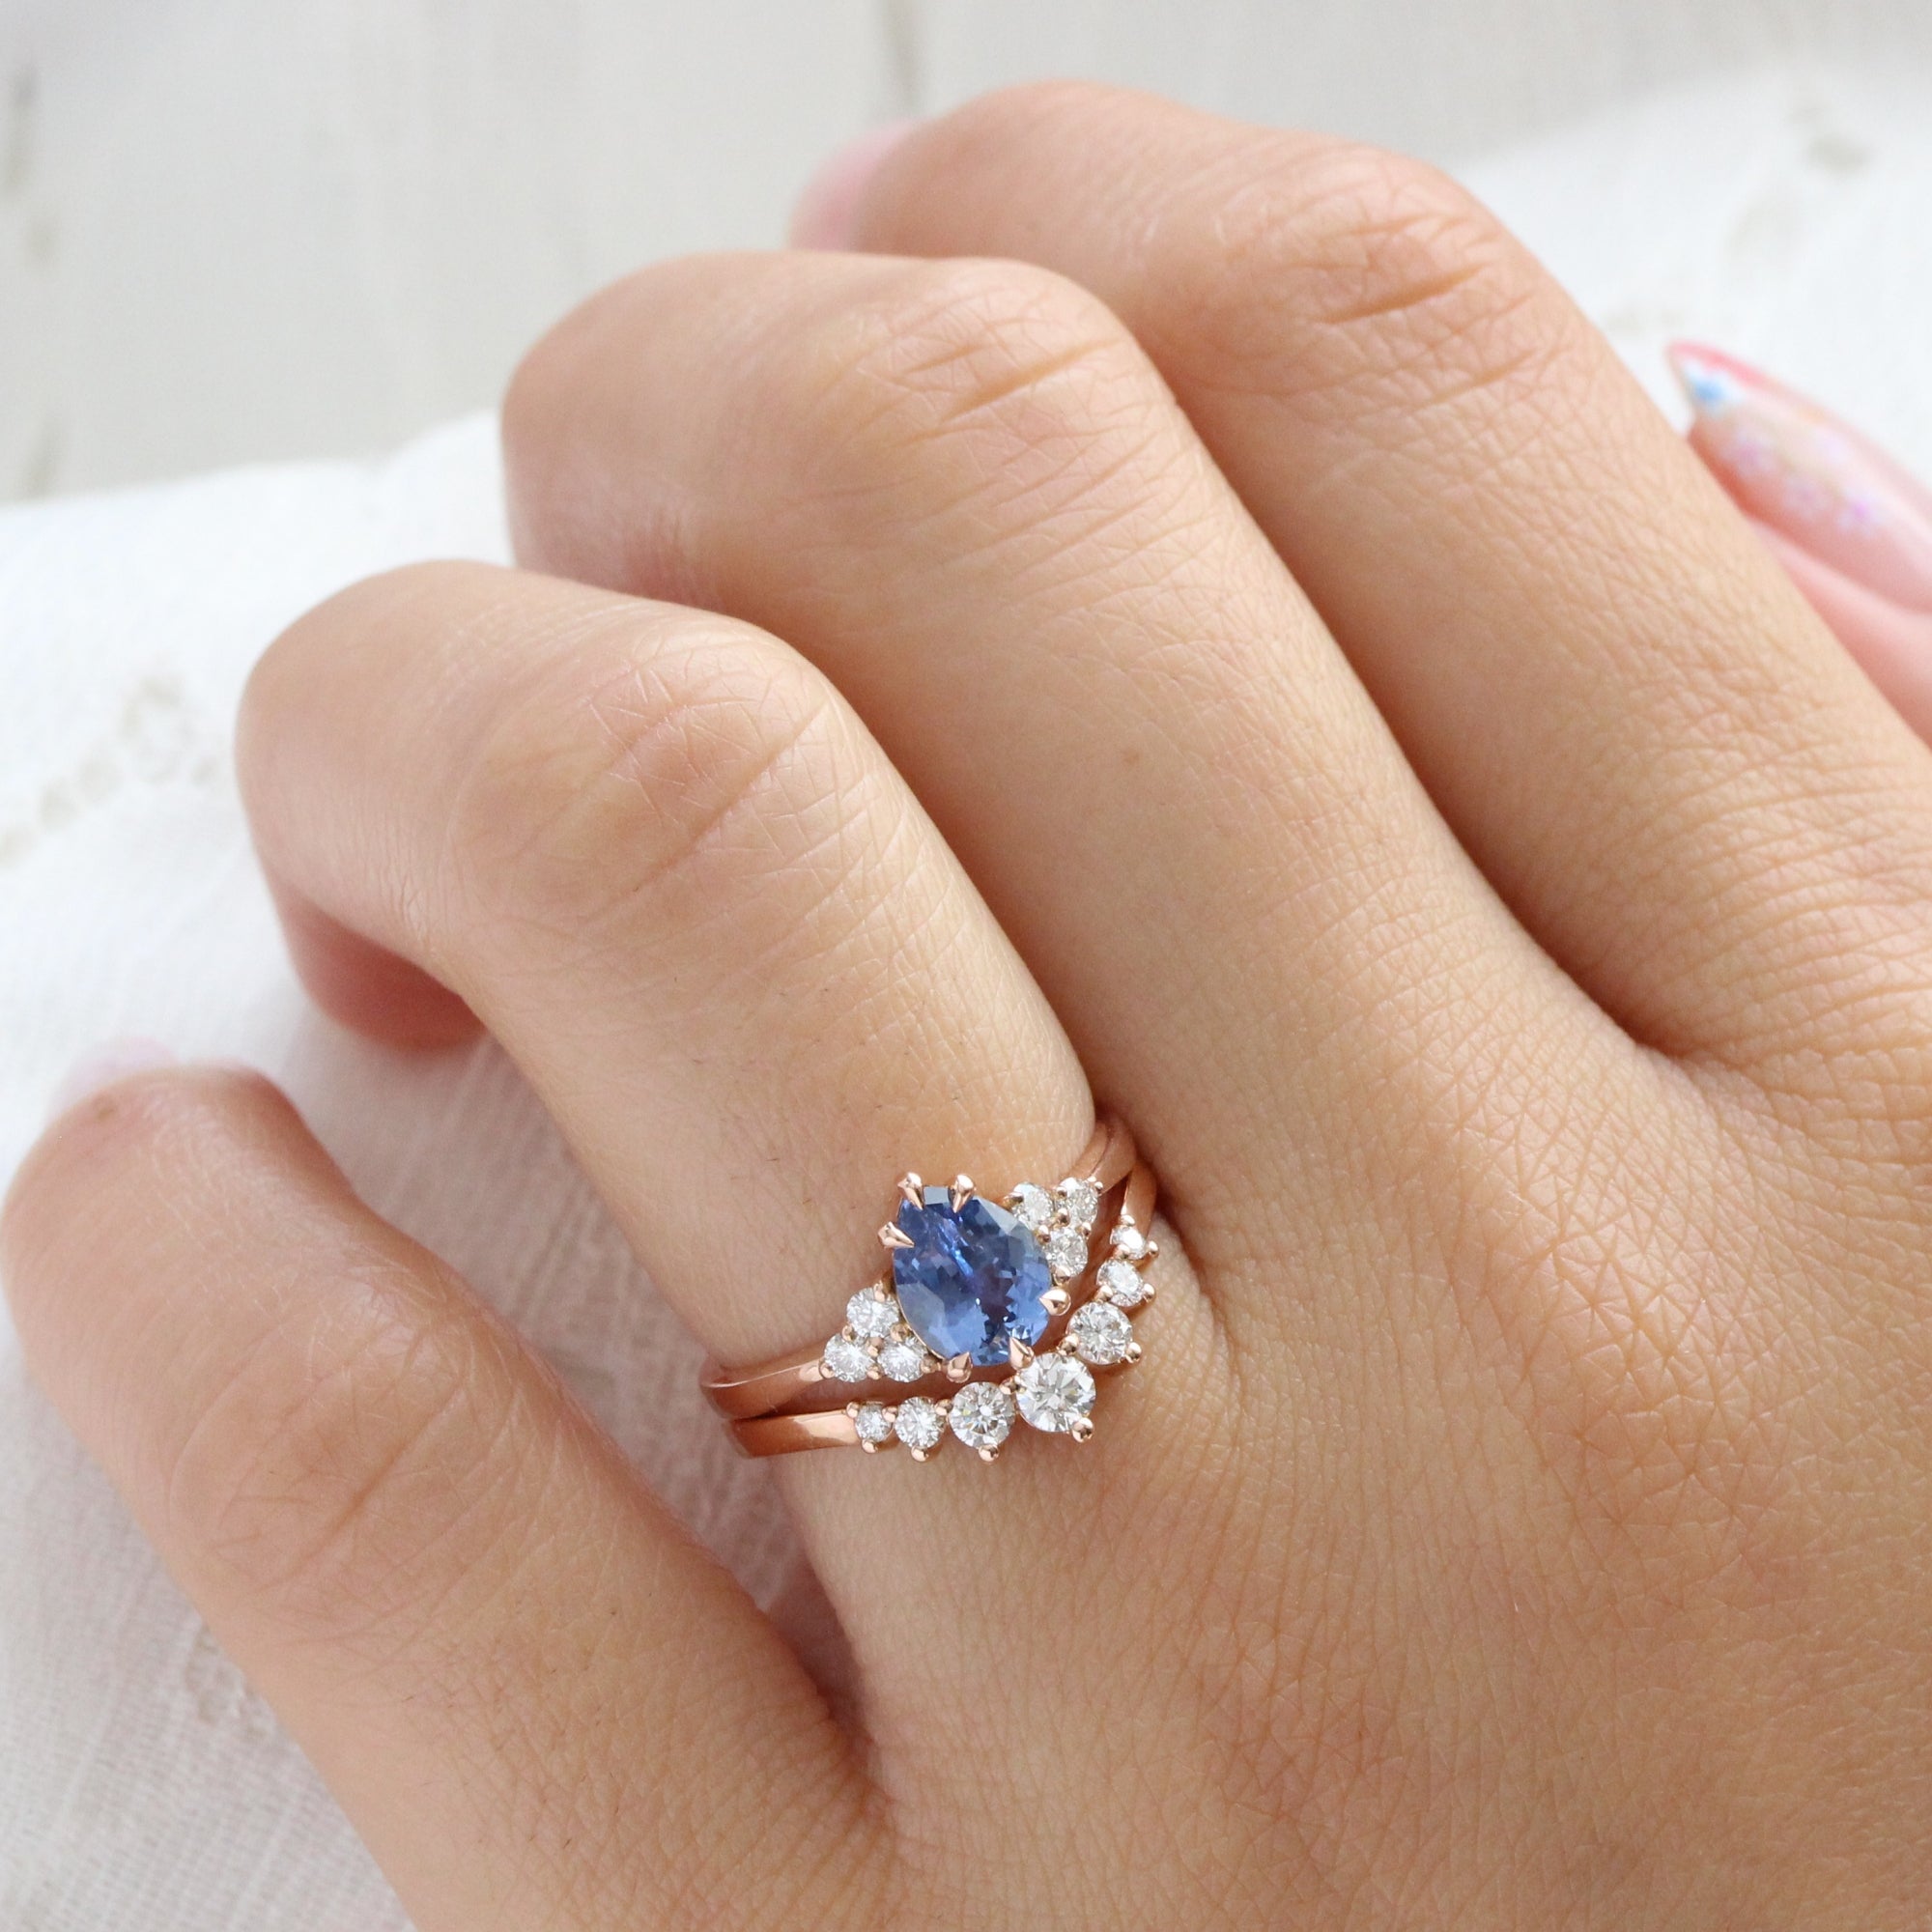 Pear blue sapphire ring rose gold 3 stone diamond ring low set engagement ring la more design jewelry